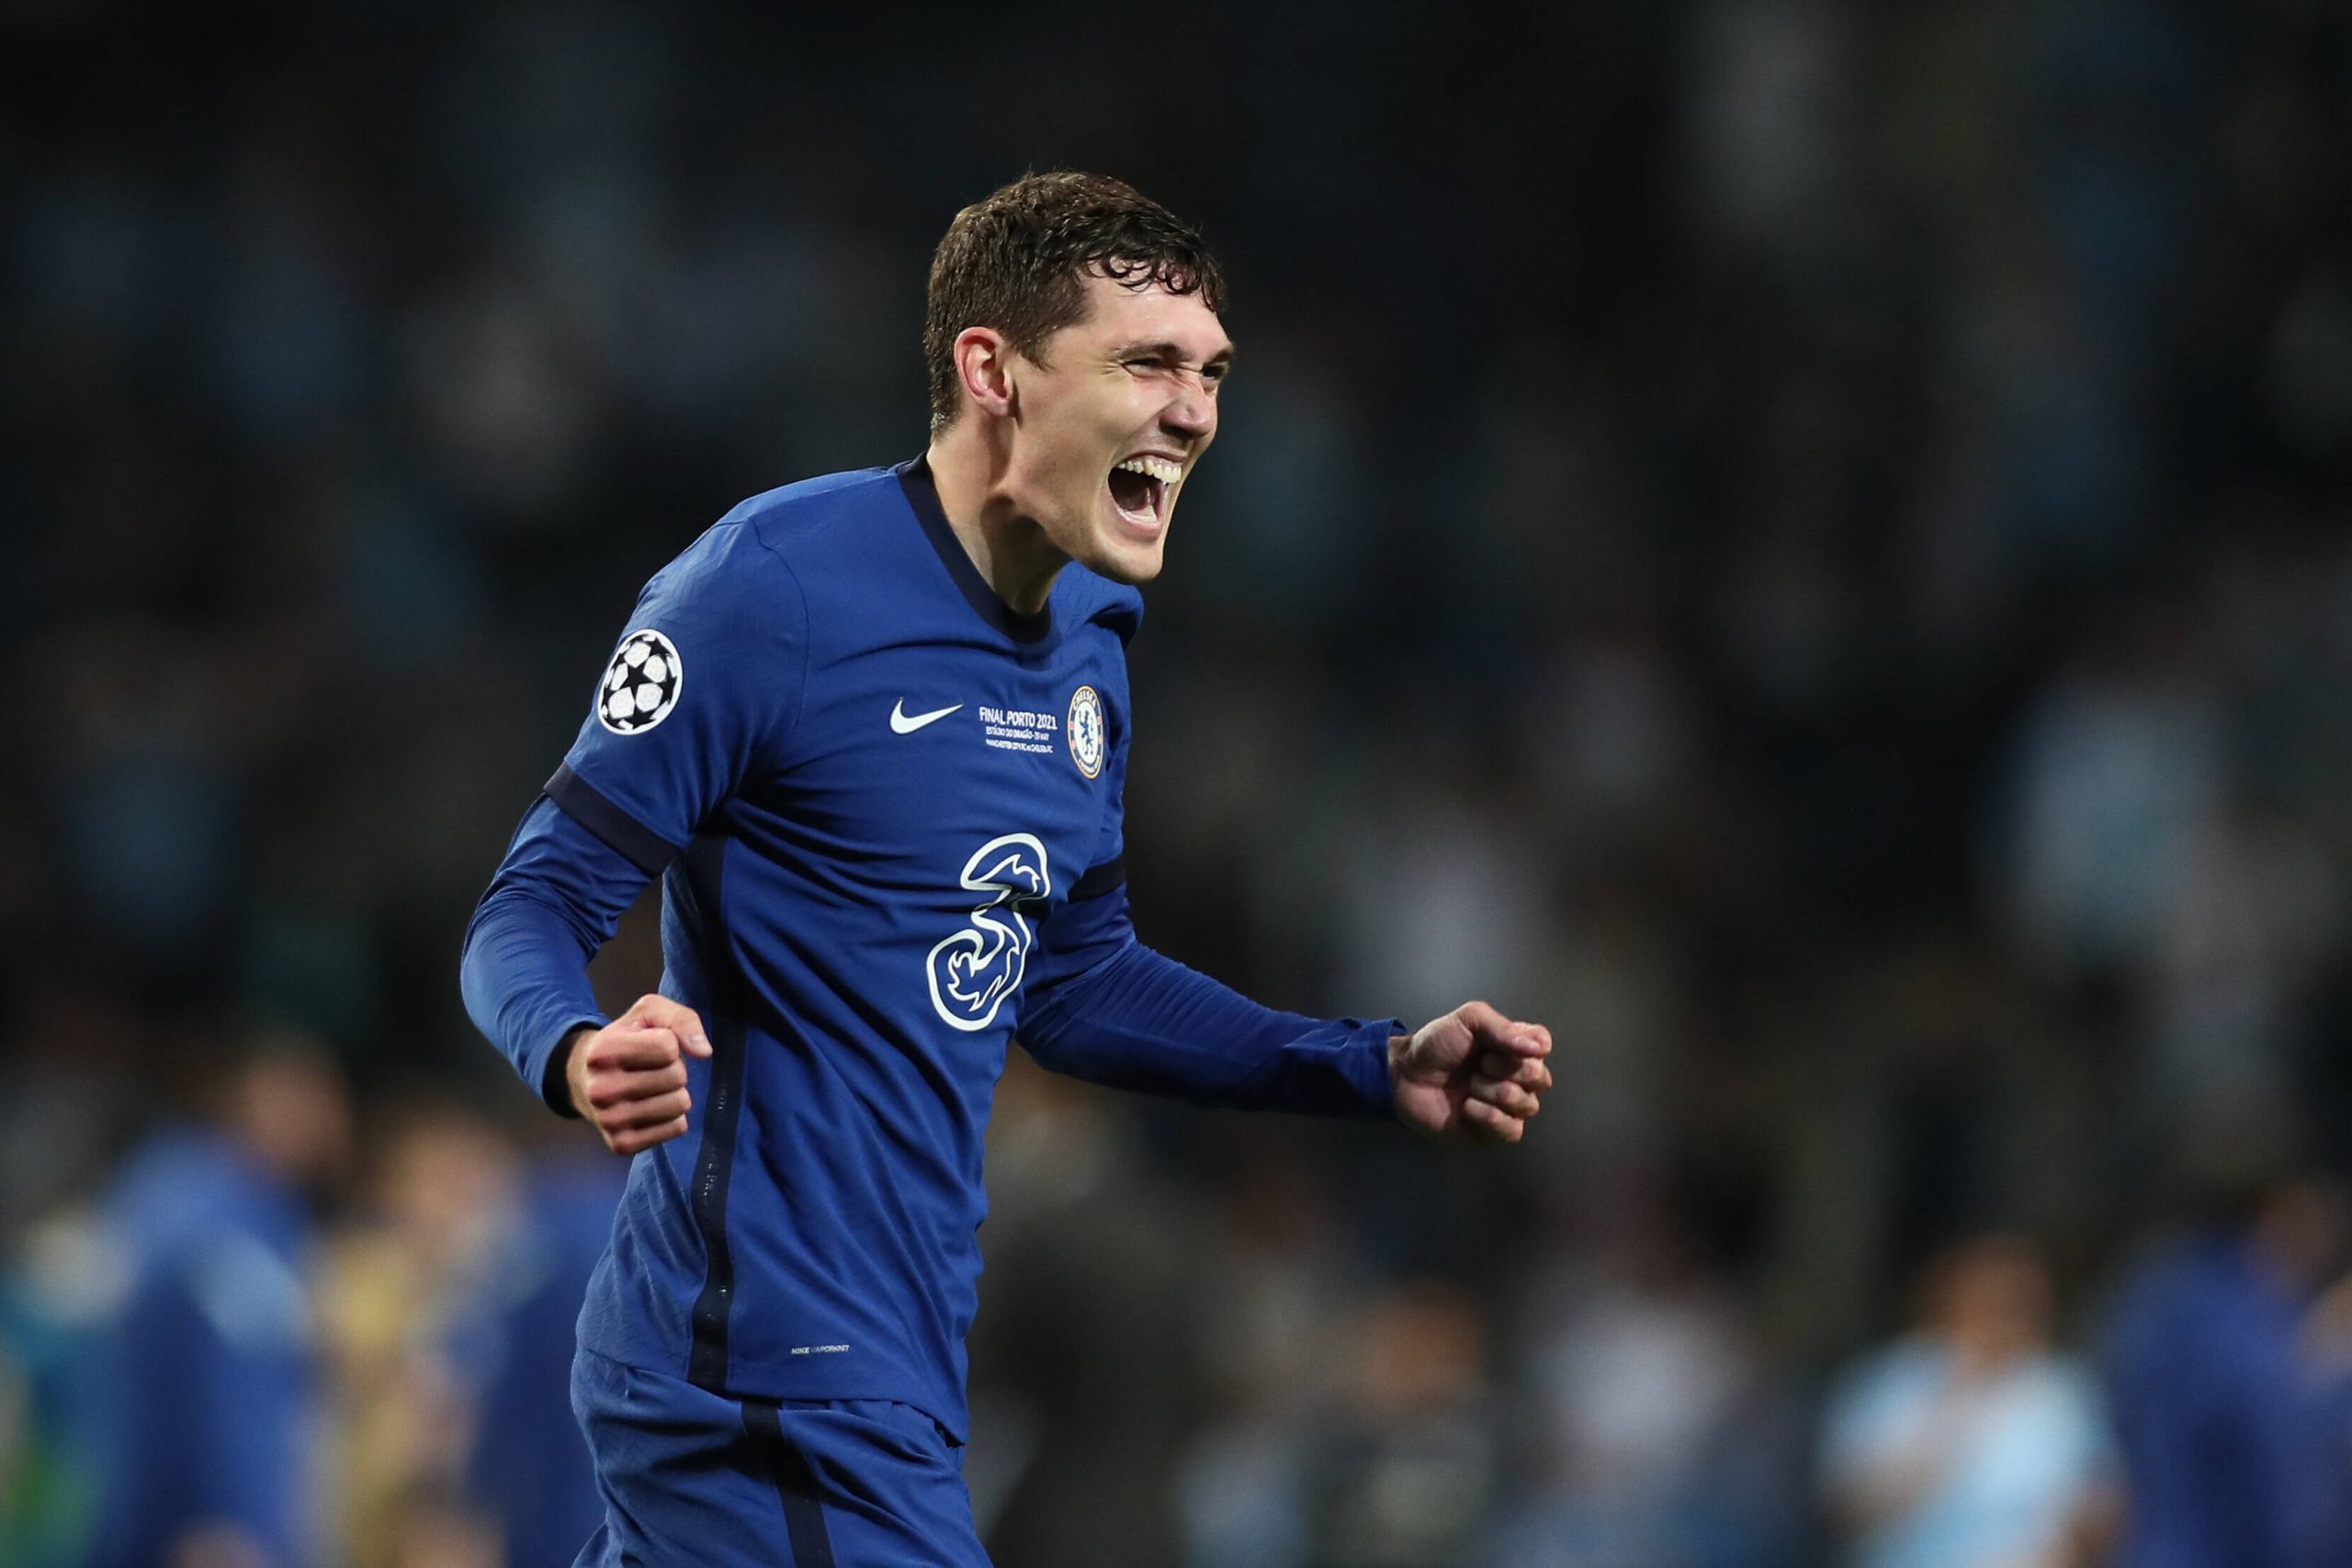 Thomas Tuchel provides Covid recovery update on Chelsea defender Andreas Christensen.